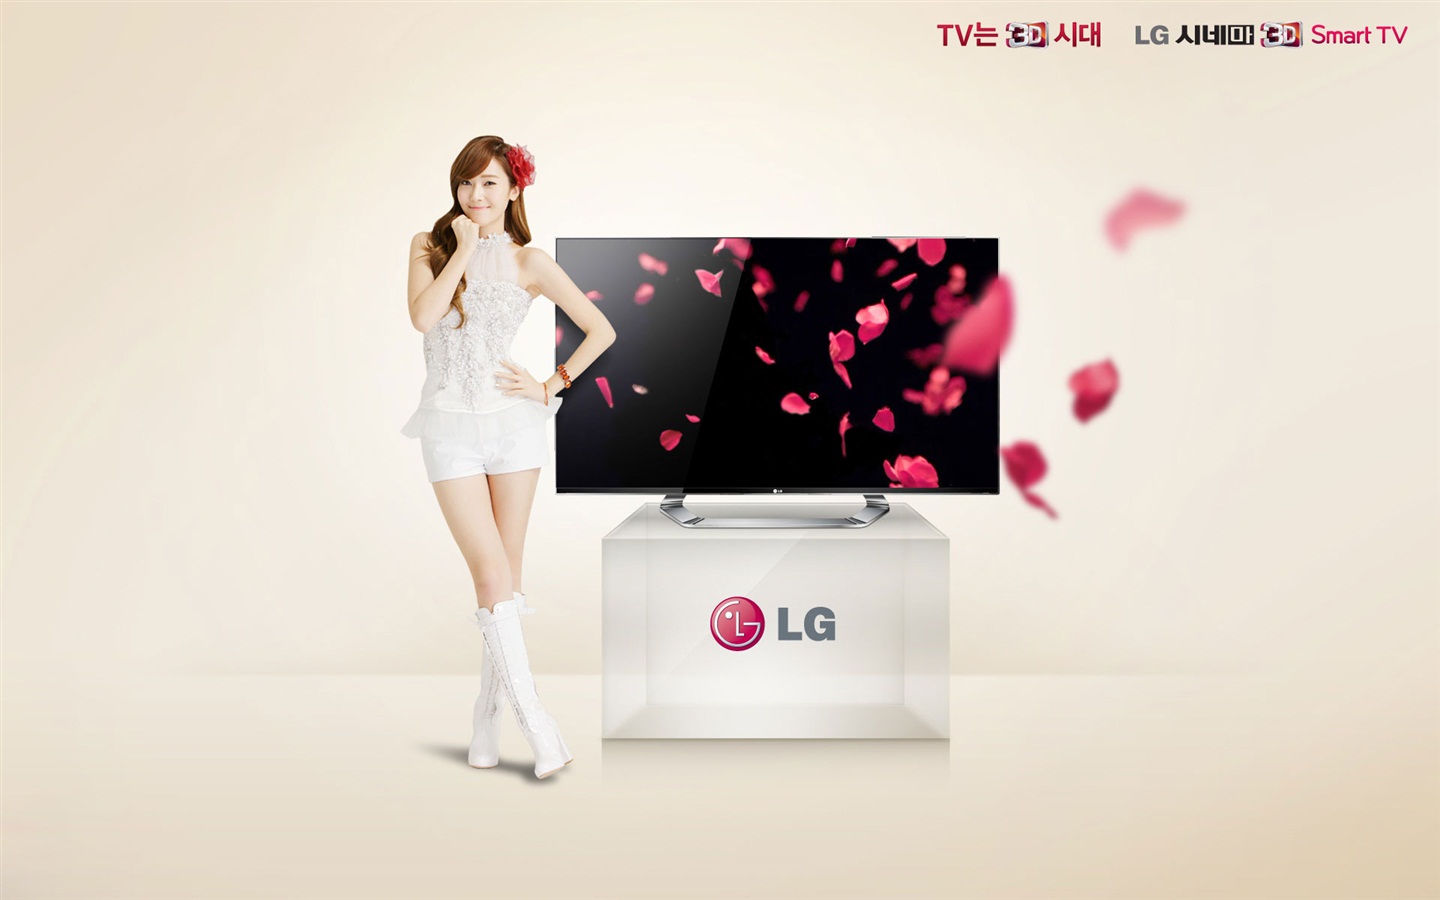 Girls Generation ACE and LG endorsements ads HD wallpapers #18 - 1440x900